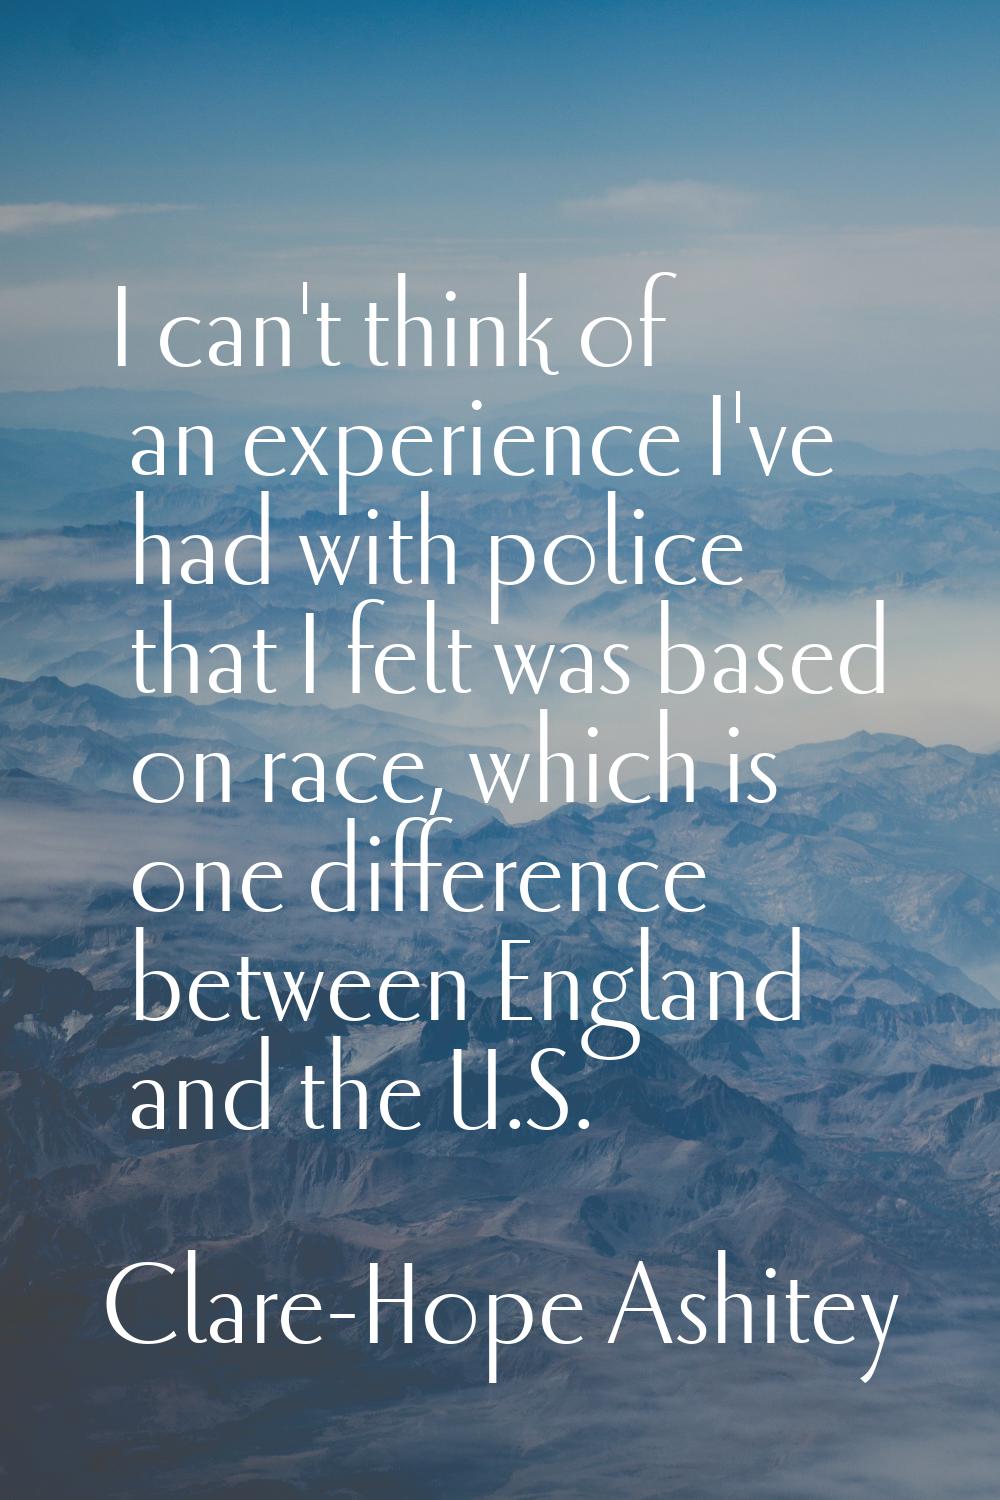 I can't think of an experience I've had with police that I felt was based on race, which is one dif